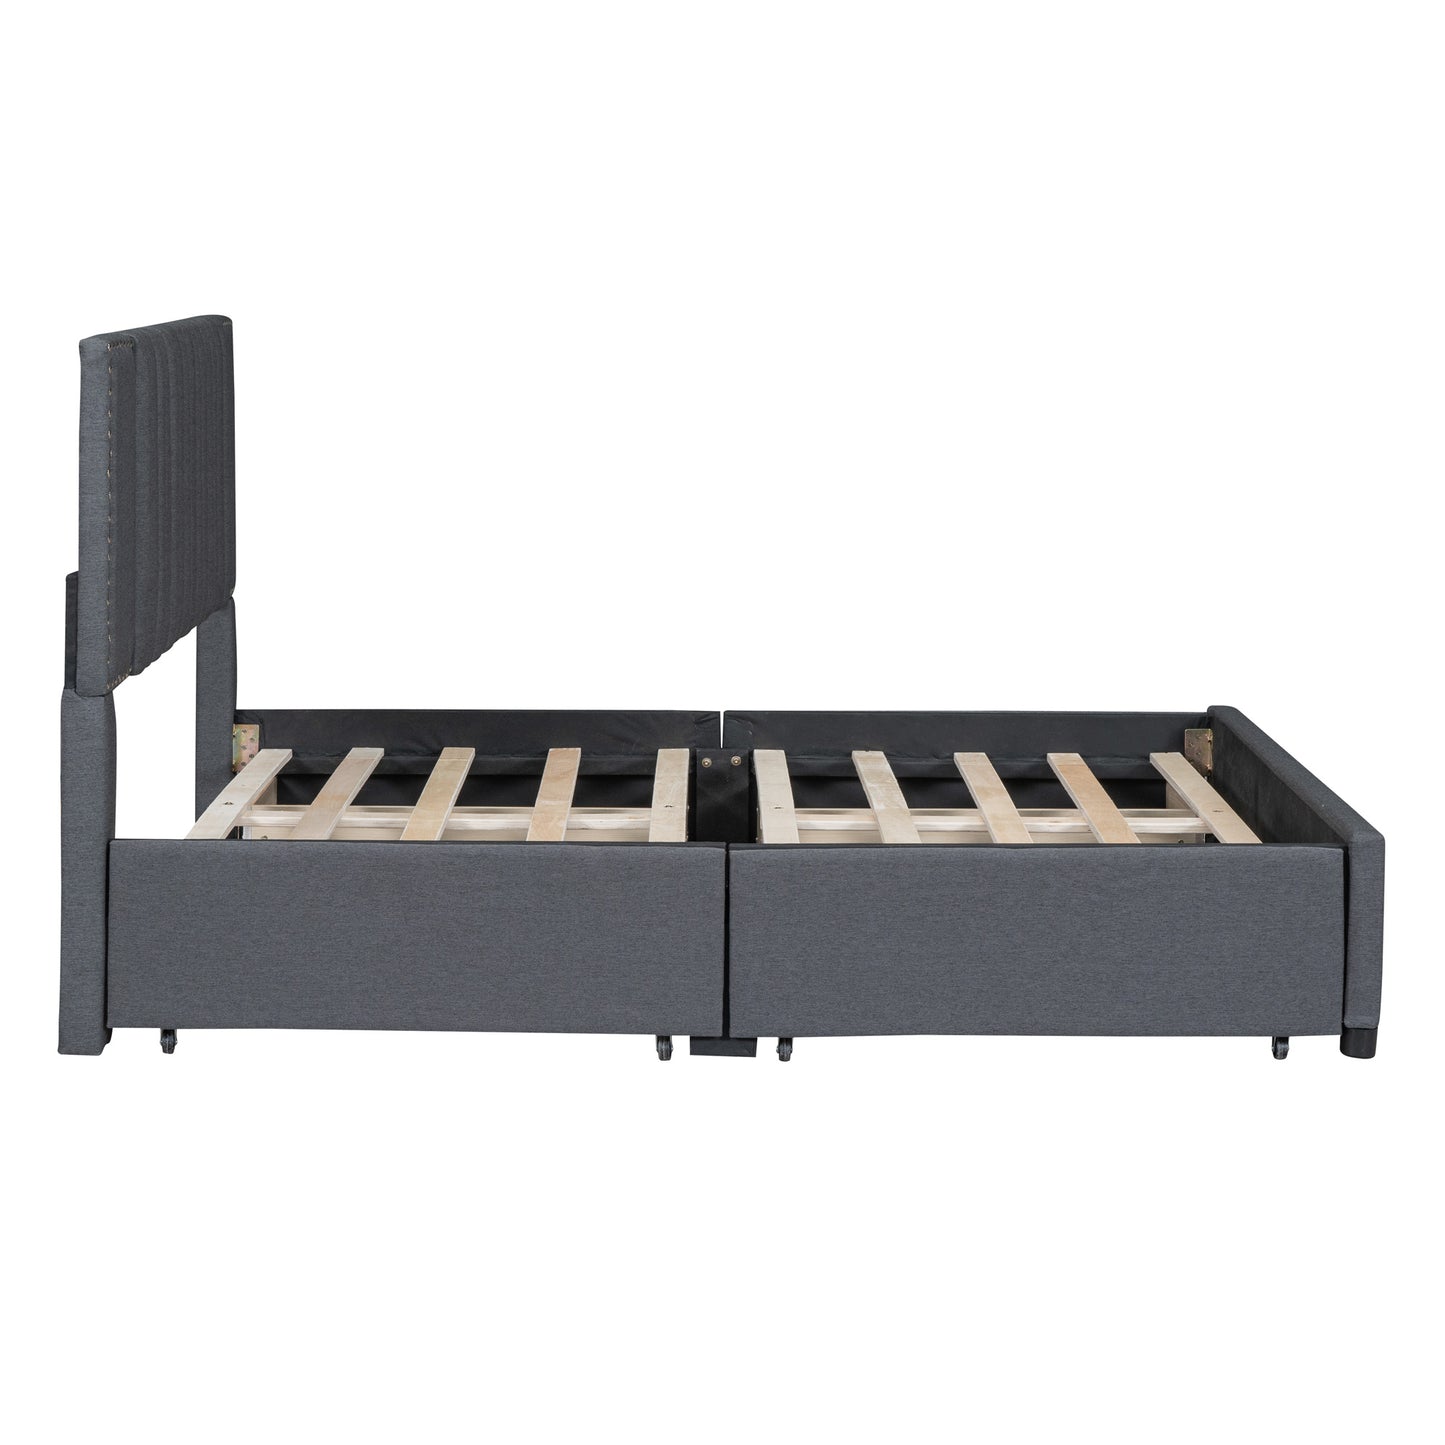 upholstered platform bed with classic headboard and 4 drawers, gray